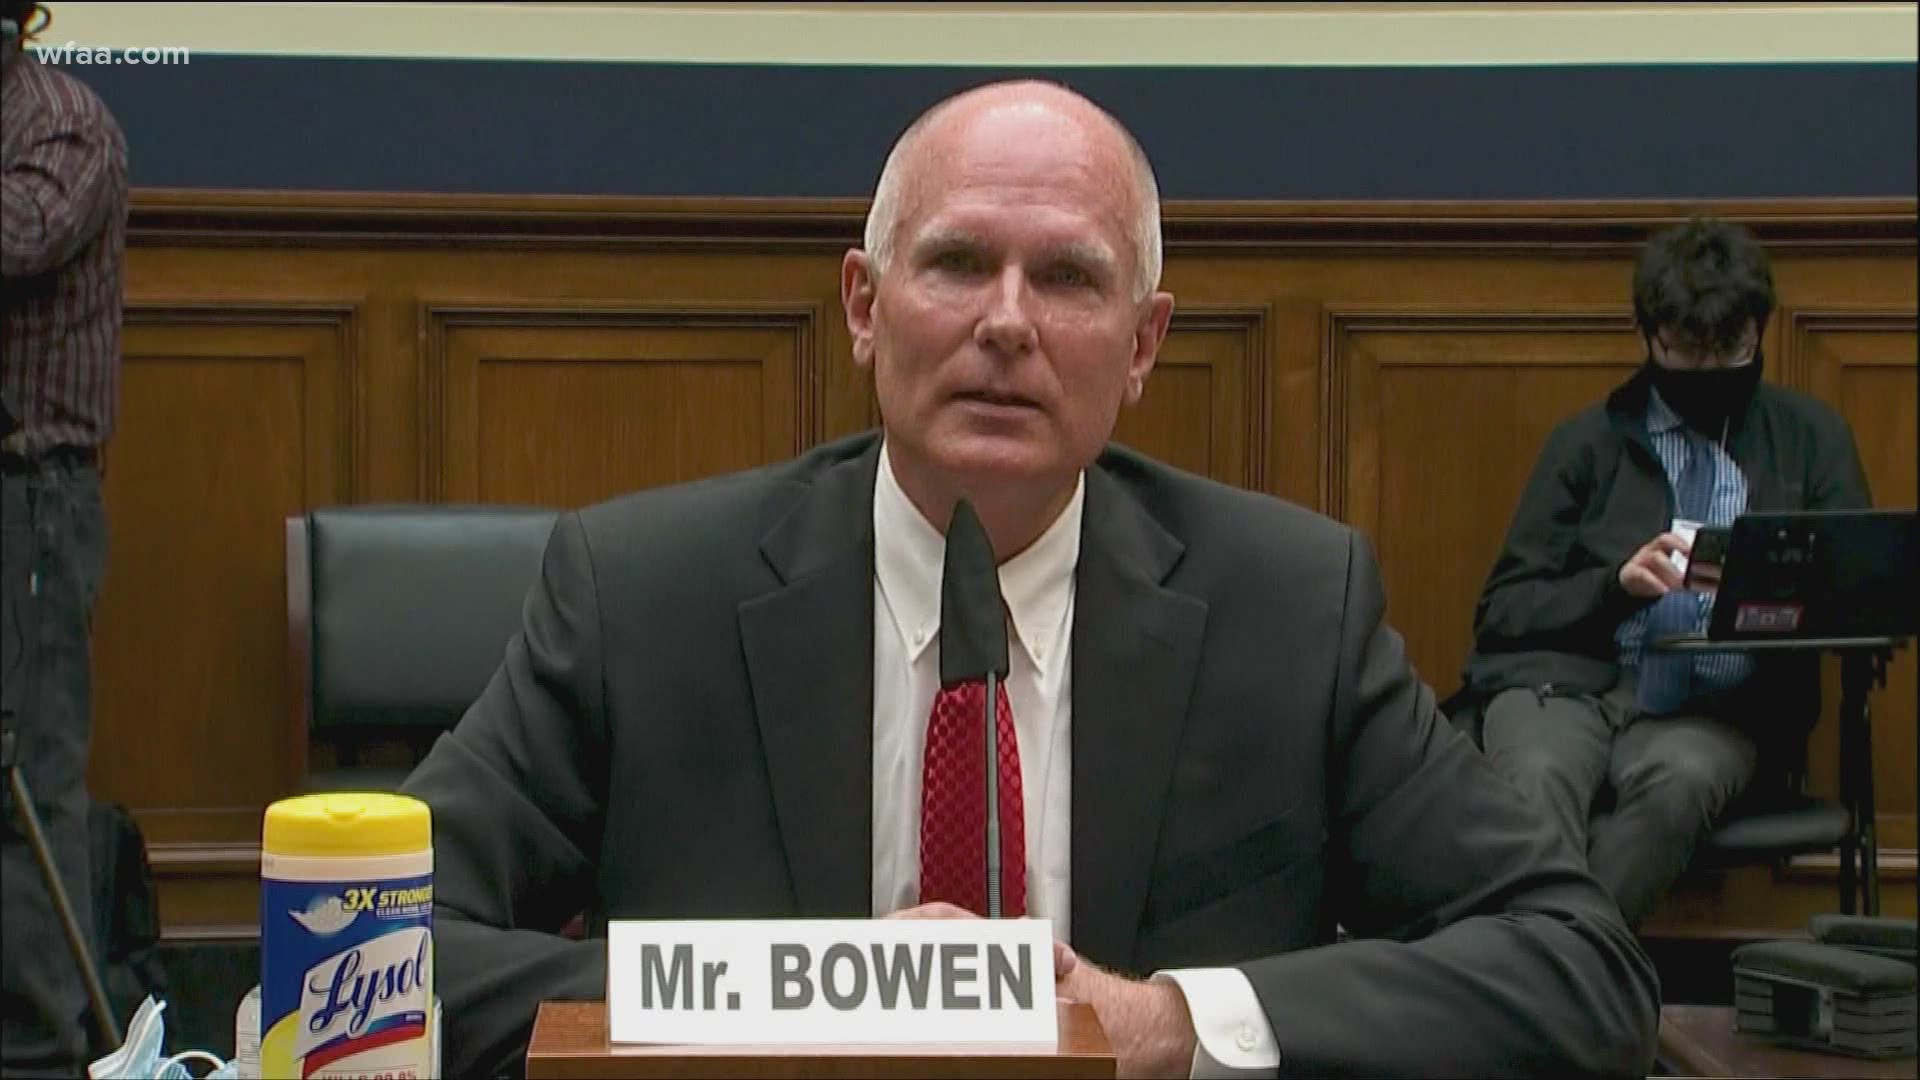 "I'm a Republican, been a lifetime Republican, and I'm embarrassed by how that's been handled," said Bowen on how the Trump administration didn't take his offer.